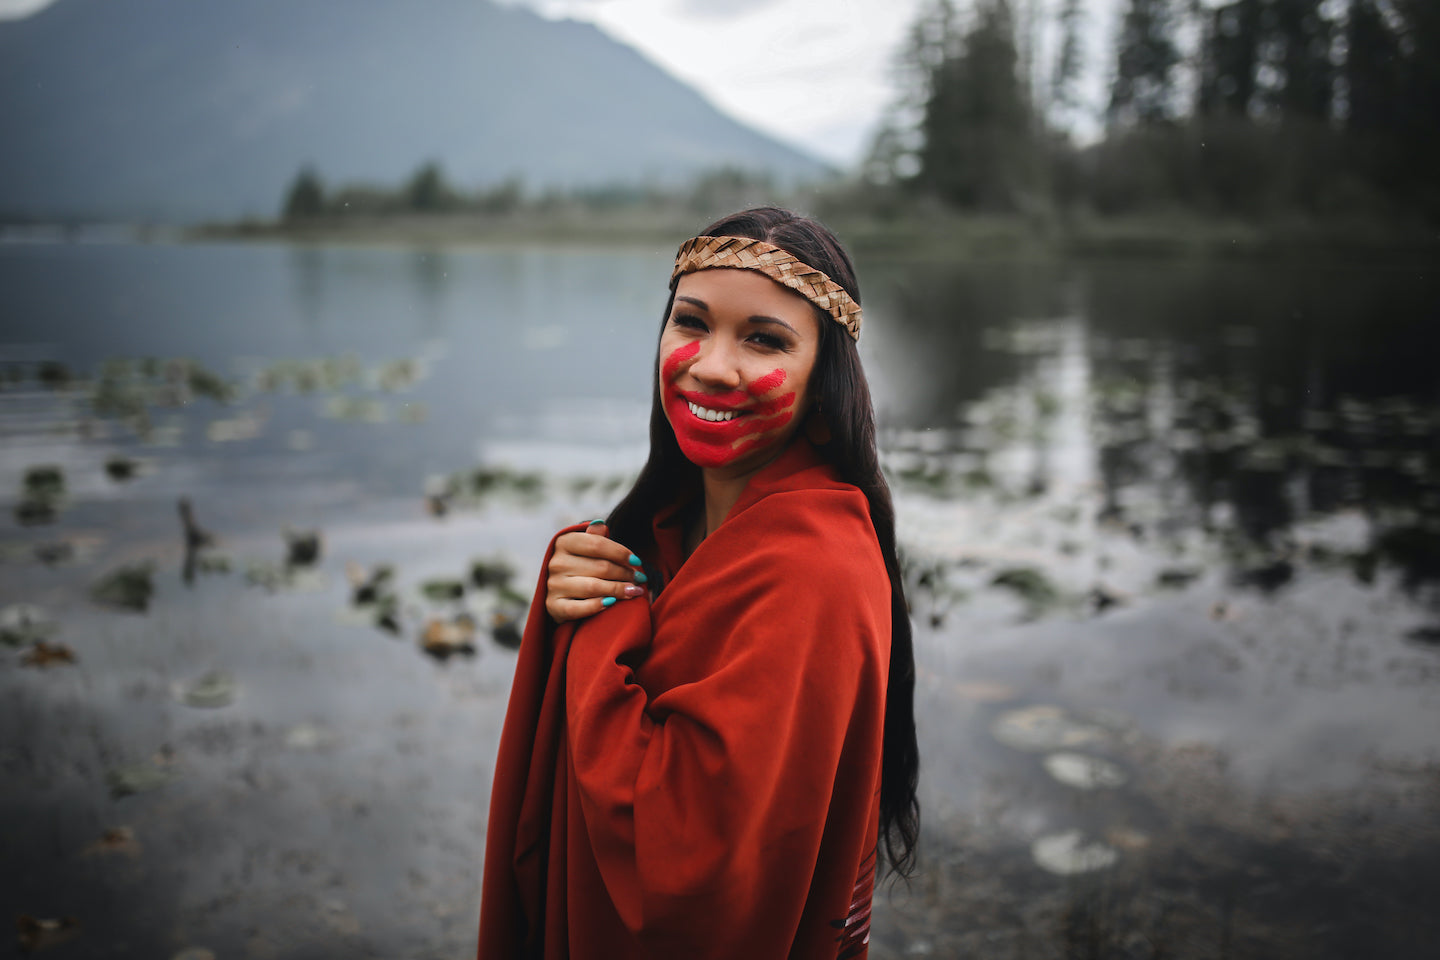 Photo of Ecko Aleck standing in front of water. We can see trees and the lower part of a mountain the background. Ecko is smiling at the camera. She has a red handprint on her face, and a red robe draped over her shoulders.